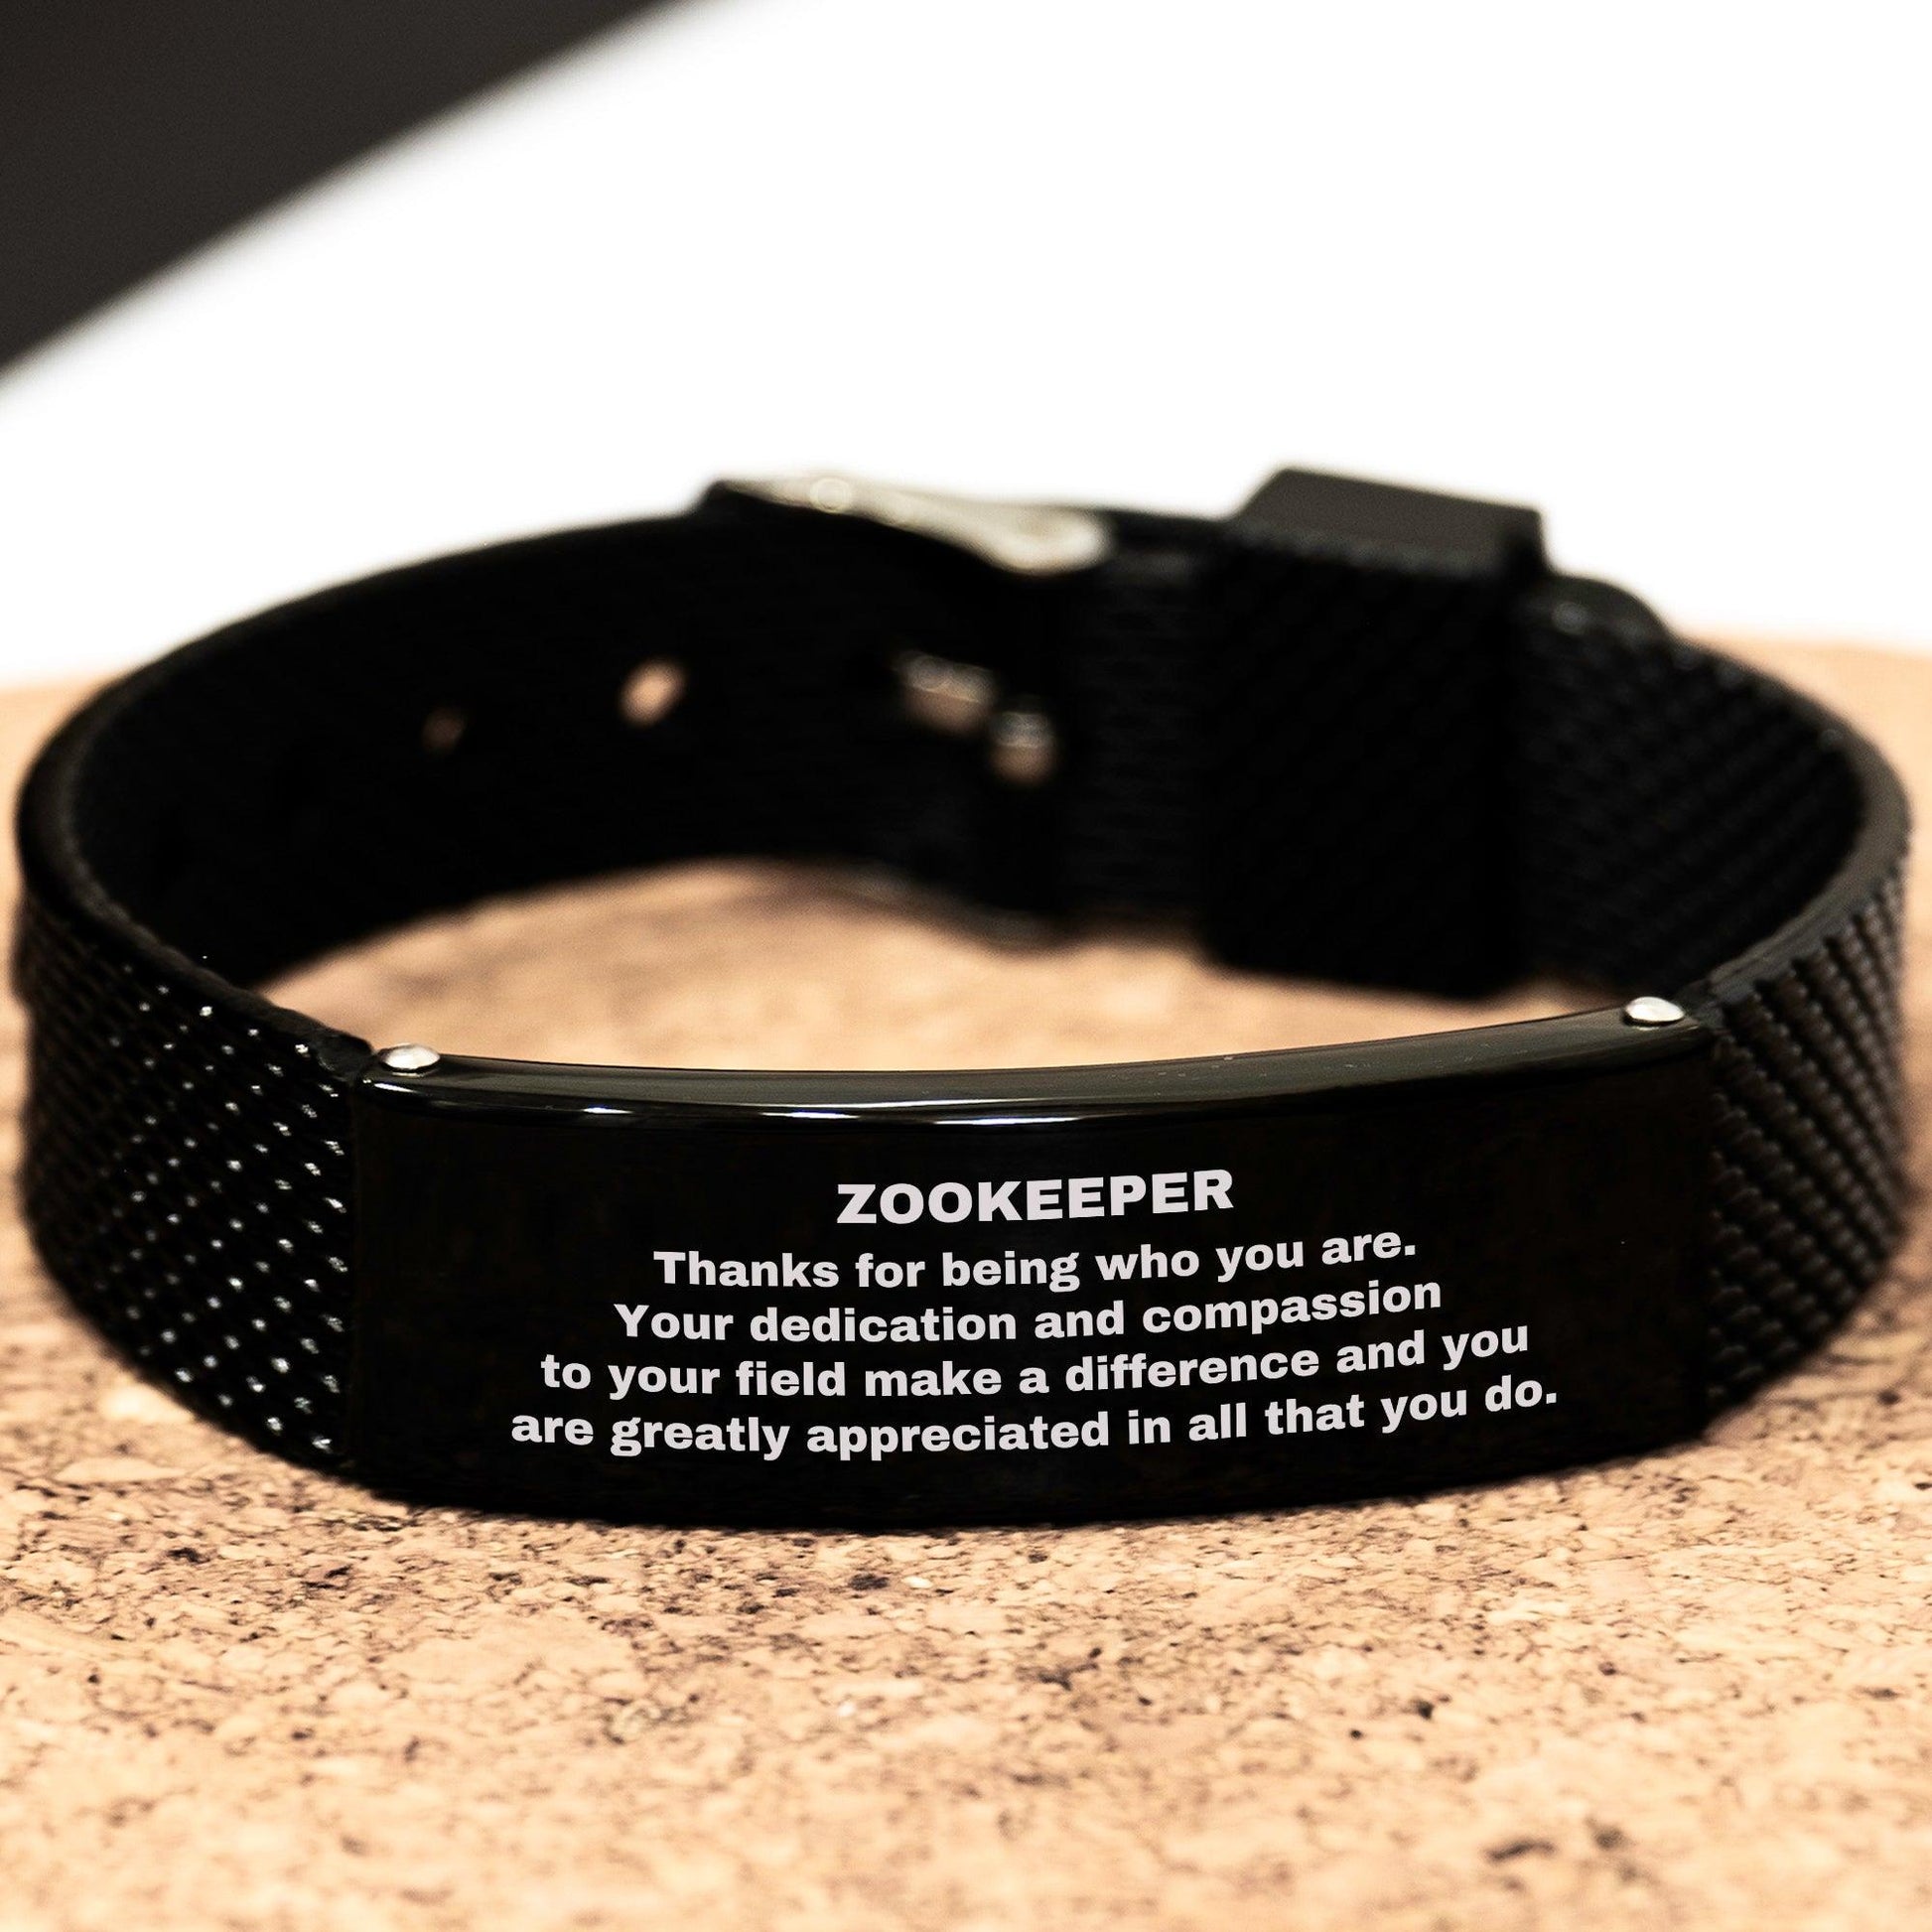 Zookeeper Black Shark Mesh Stainless Steel Engraved Bracelet - Thanks for being who you are - Birthday Christmas Jewelry Gifts Coworkers Colleague Boss - Mallard Moon Gift Shop